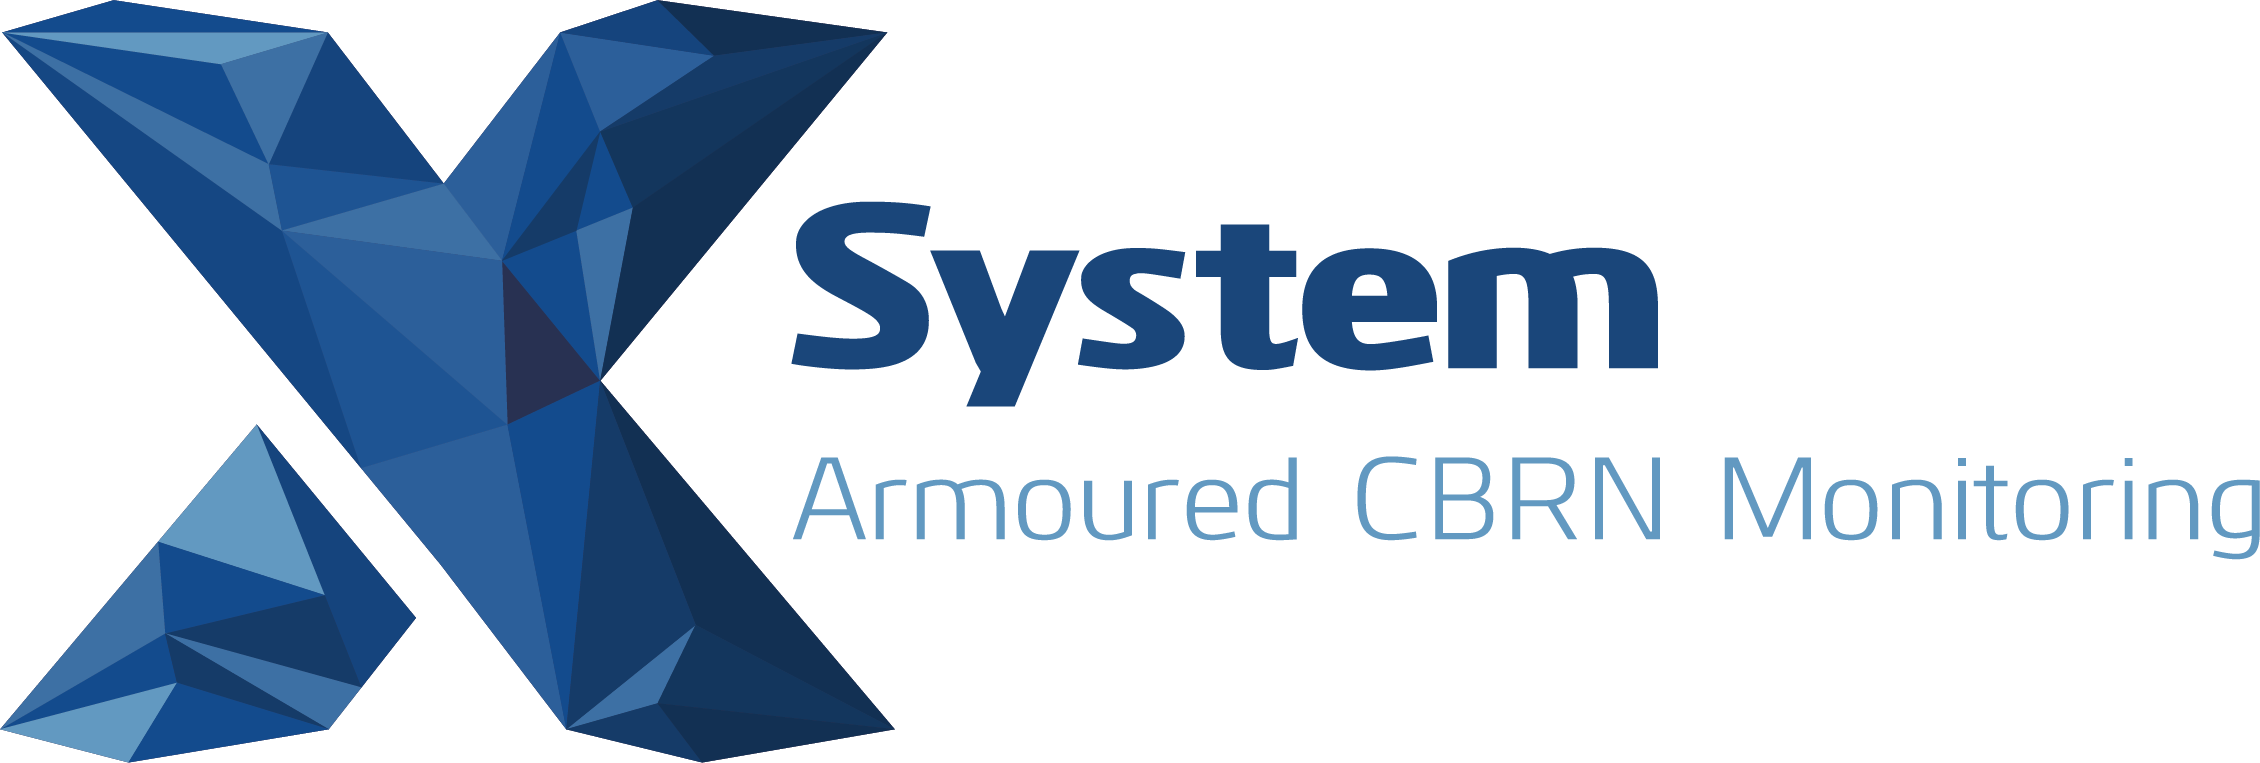 X-System Armoured CBRN Monitoring to be showcased at IDEX 2023